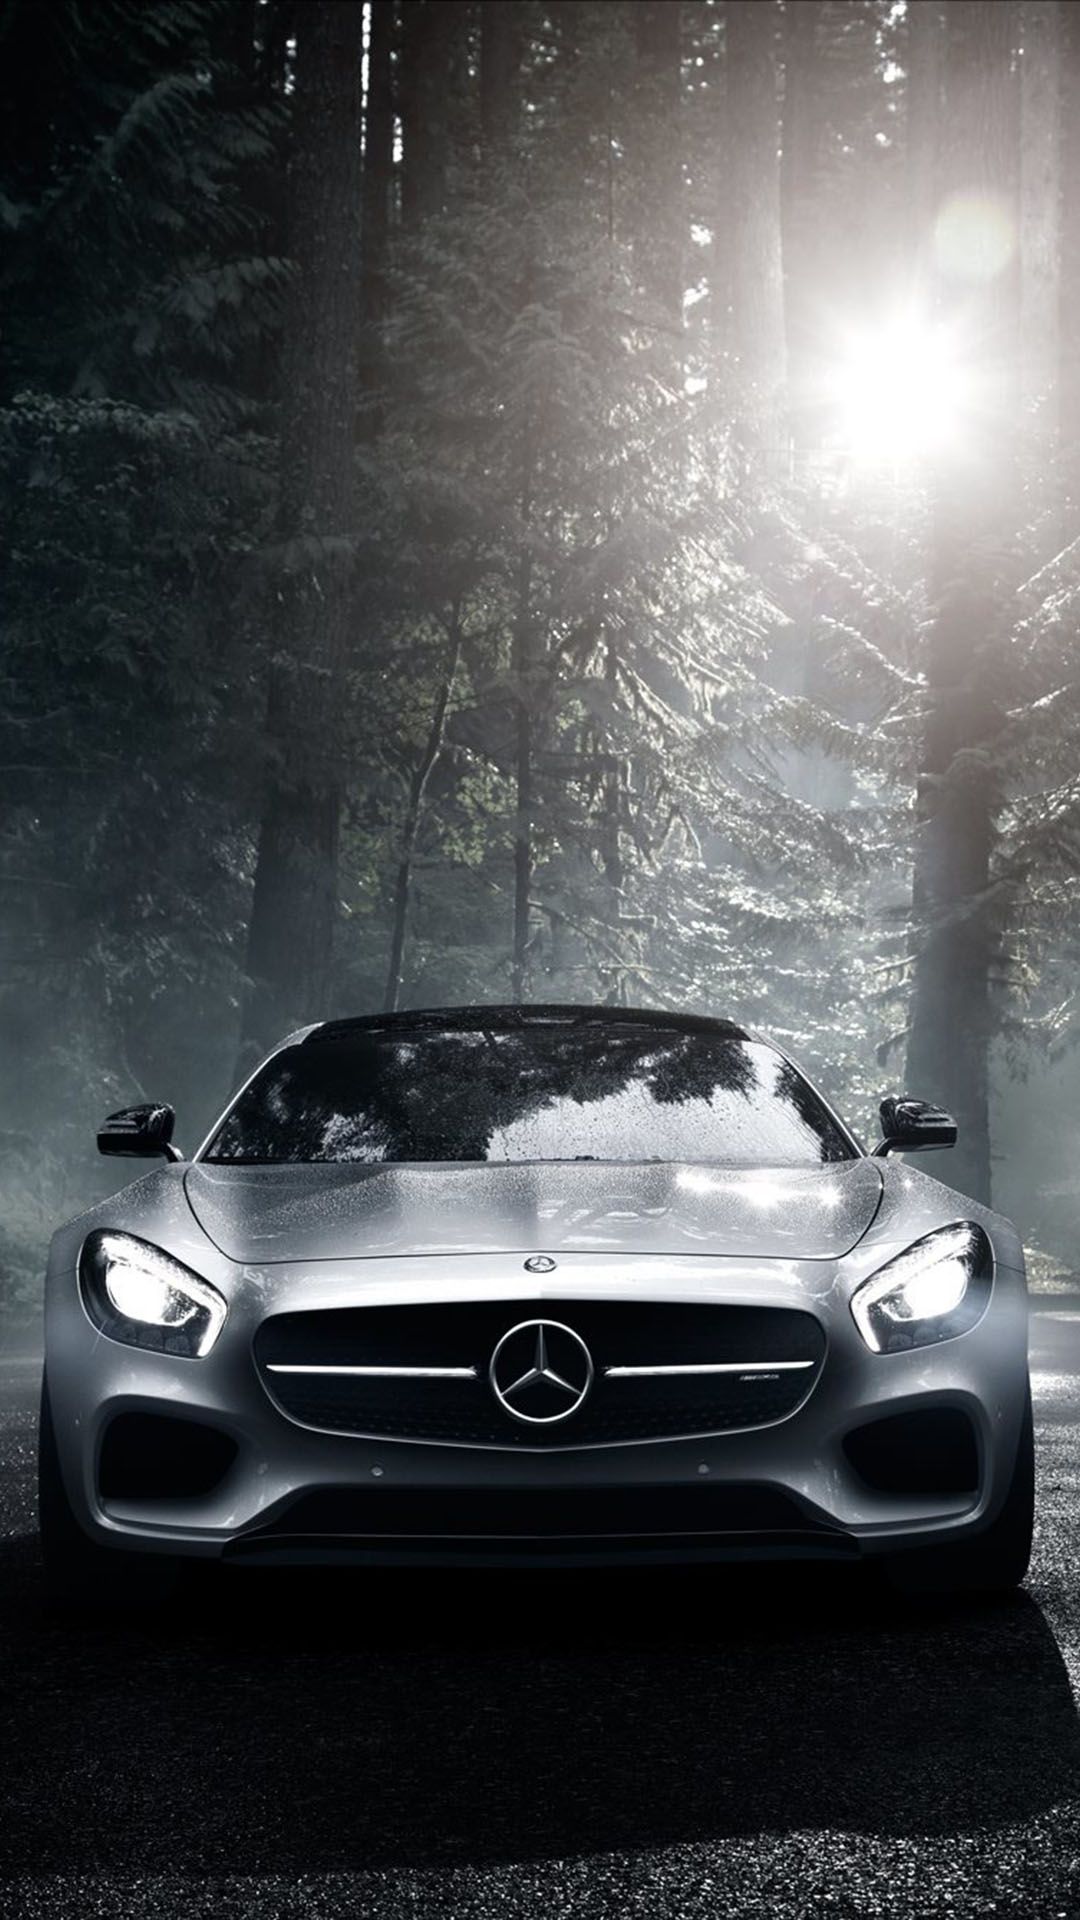 Mercedes Benz Amg Gt HD Wallpaper For IPhone X, 8 8 Plus, 7 7 Plus